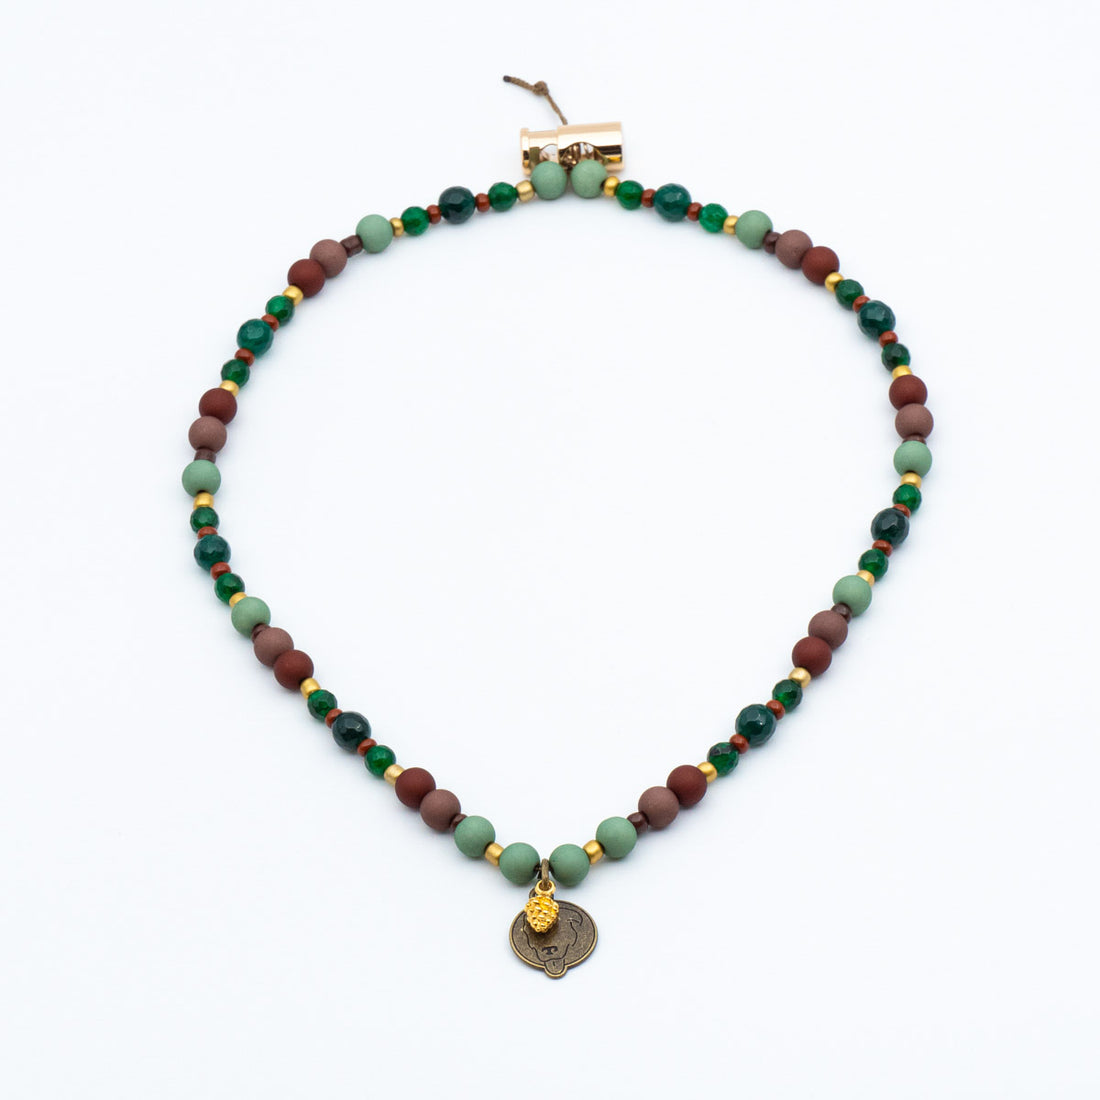 Dog Necklace Healing Stones - Forest (Jade)